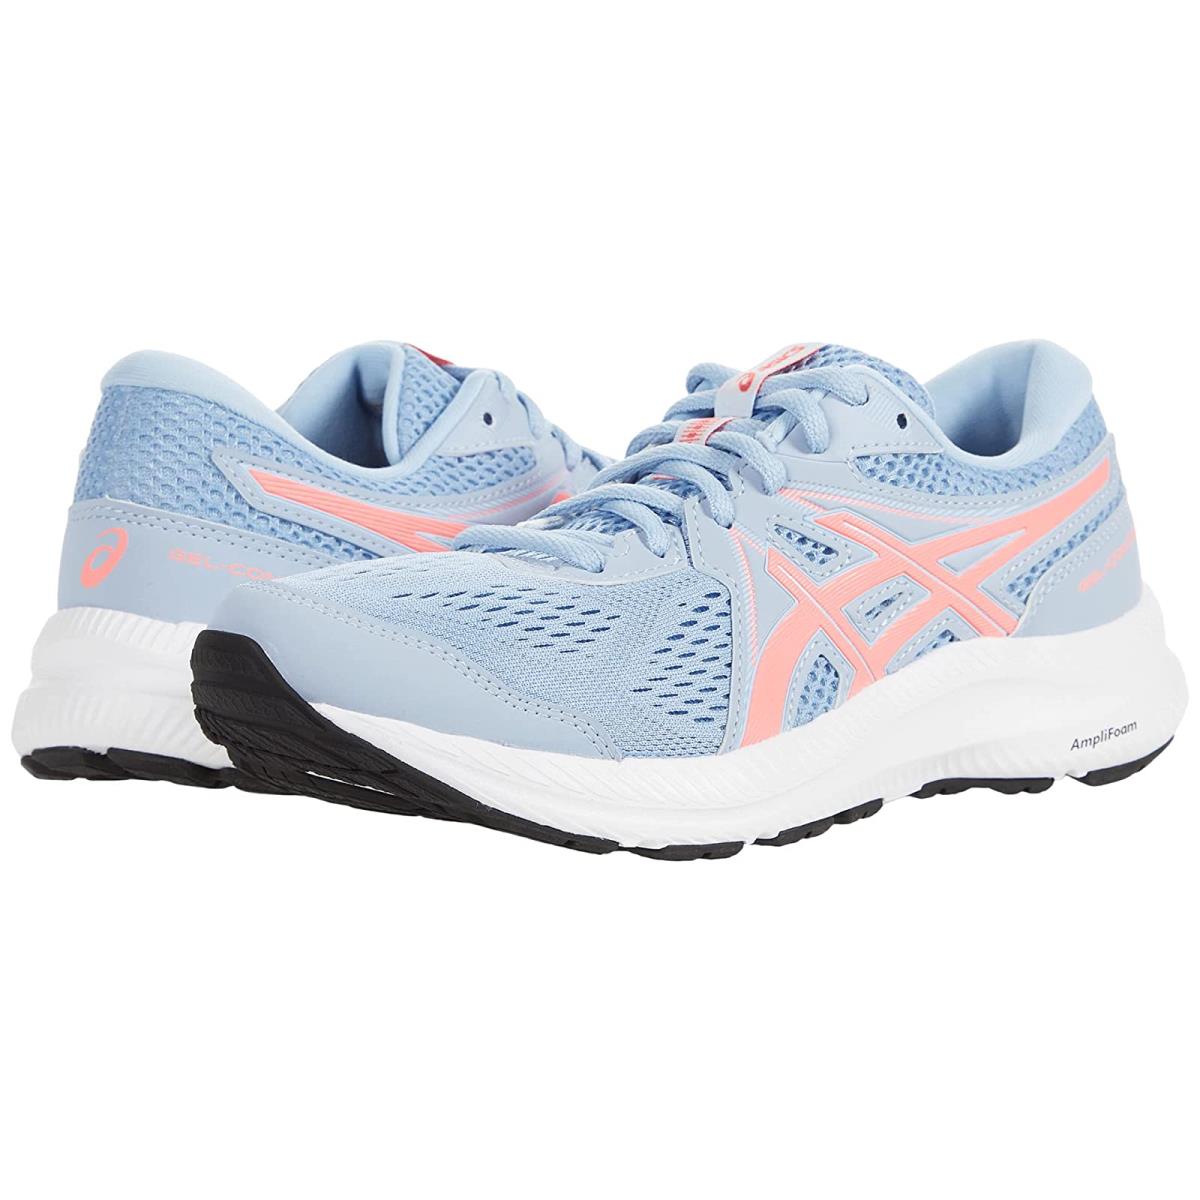 Woman`s Sneakers Athletic Shoes Asics Gel-contend 7 Mist/Blazing Coral